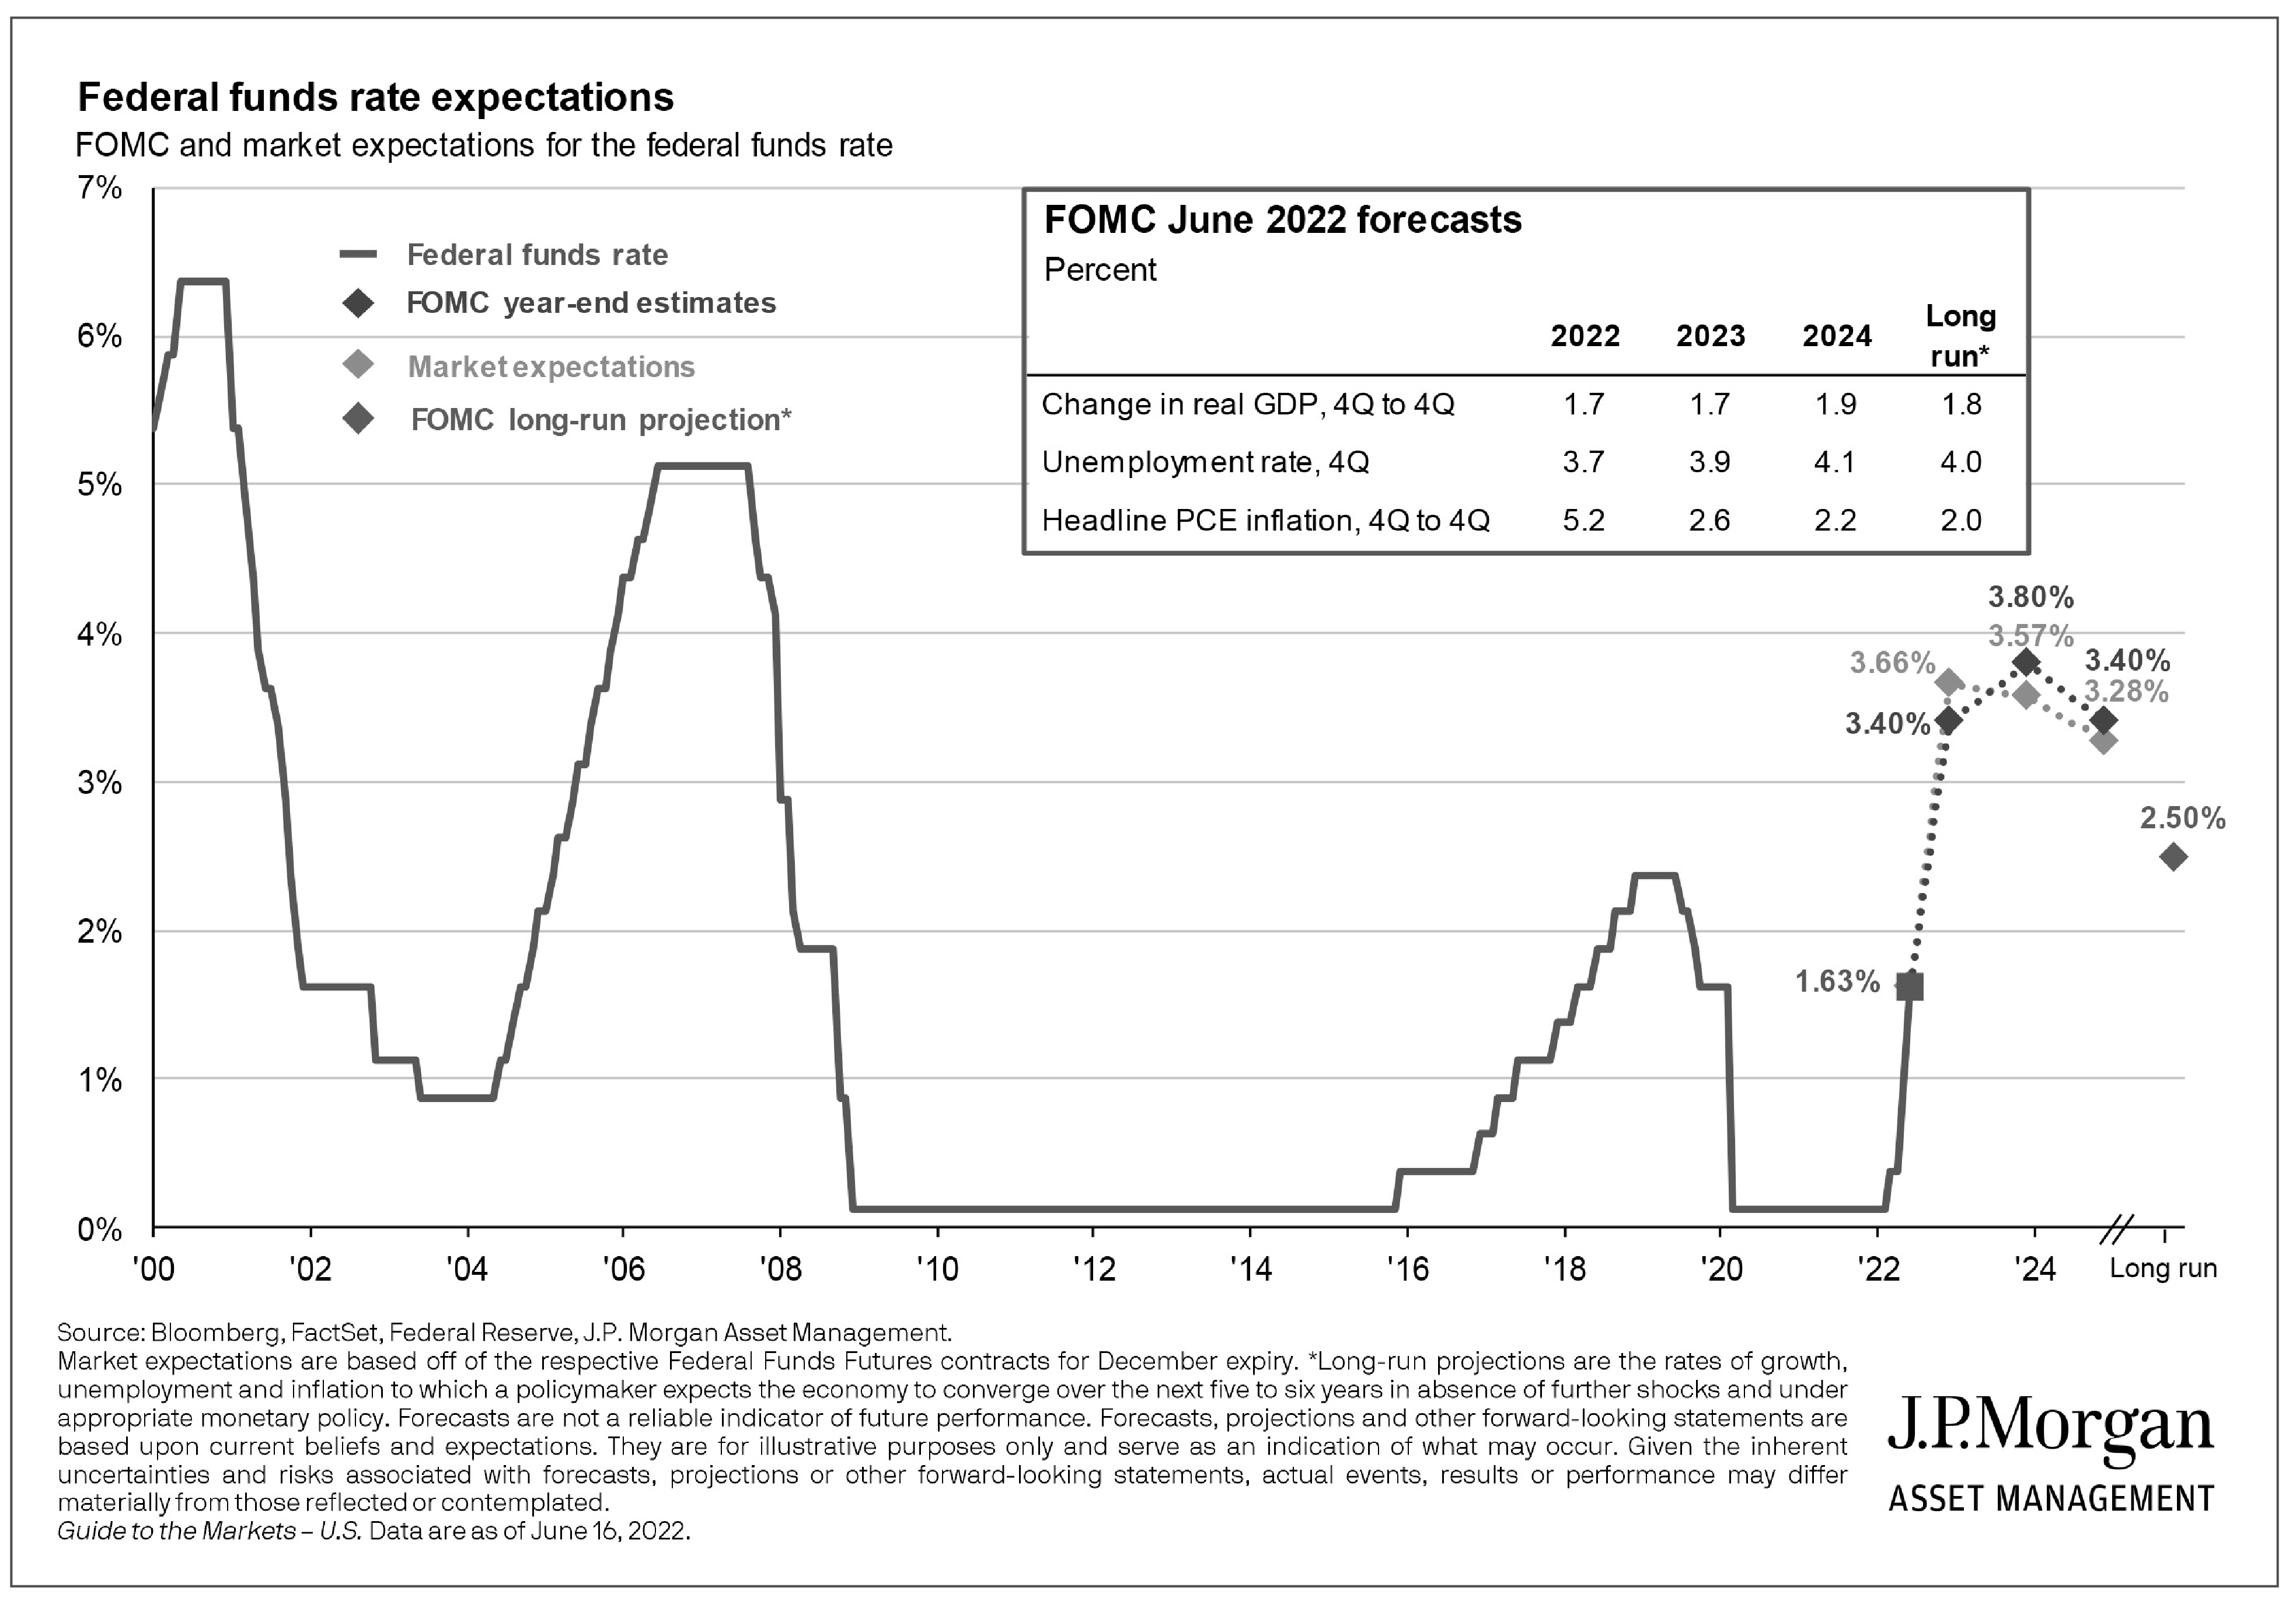 Federal Funds Rate Expectations graphic